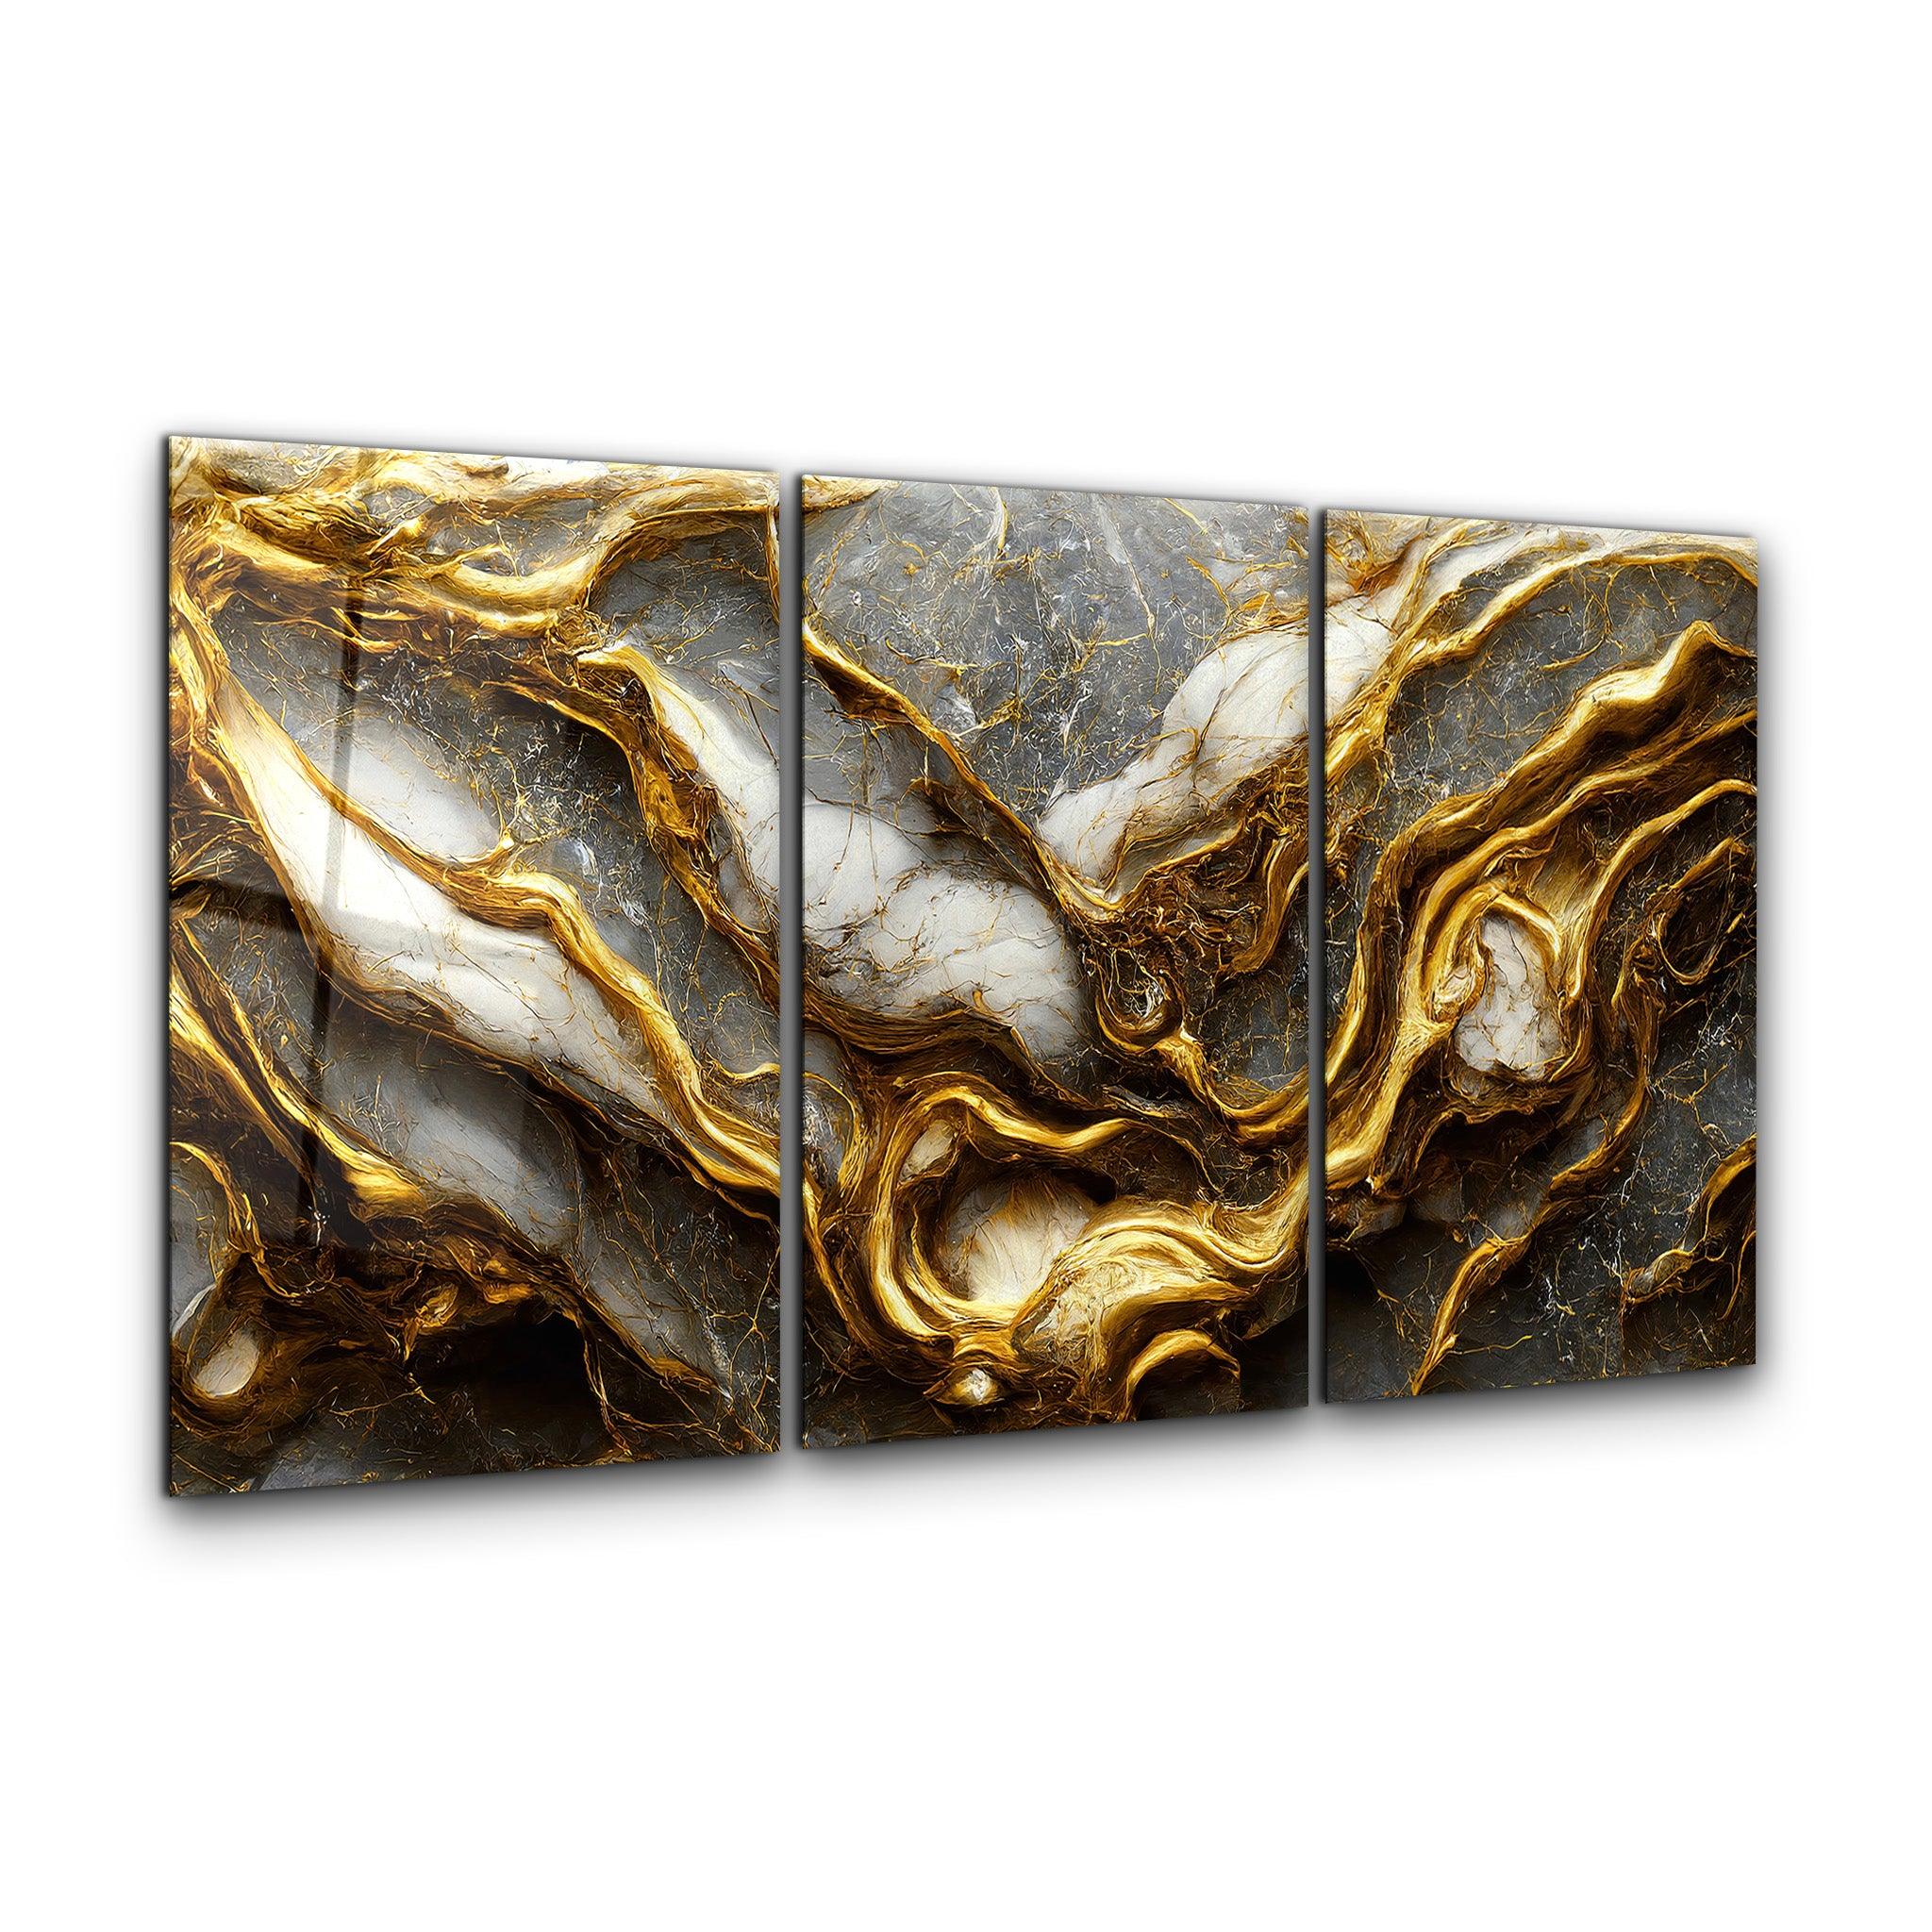 ・"Golden Roots in the Marble - Trio"・Glass Wall Art - ArtDesigna Glass Printing Wall Art